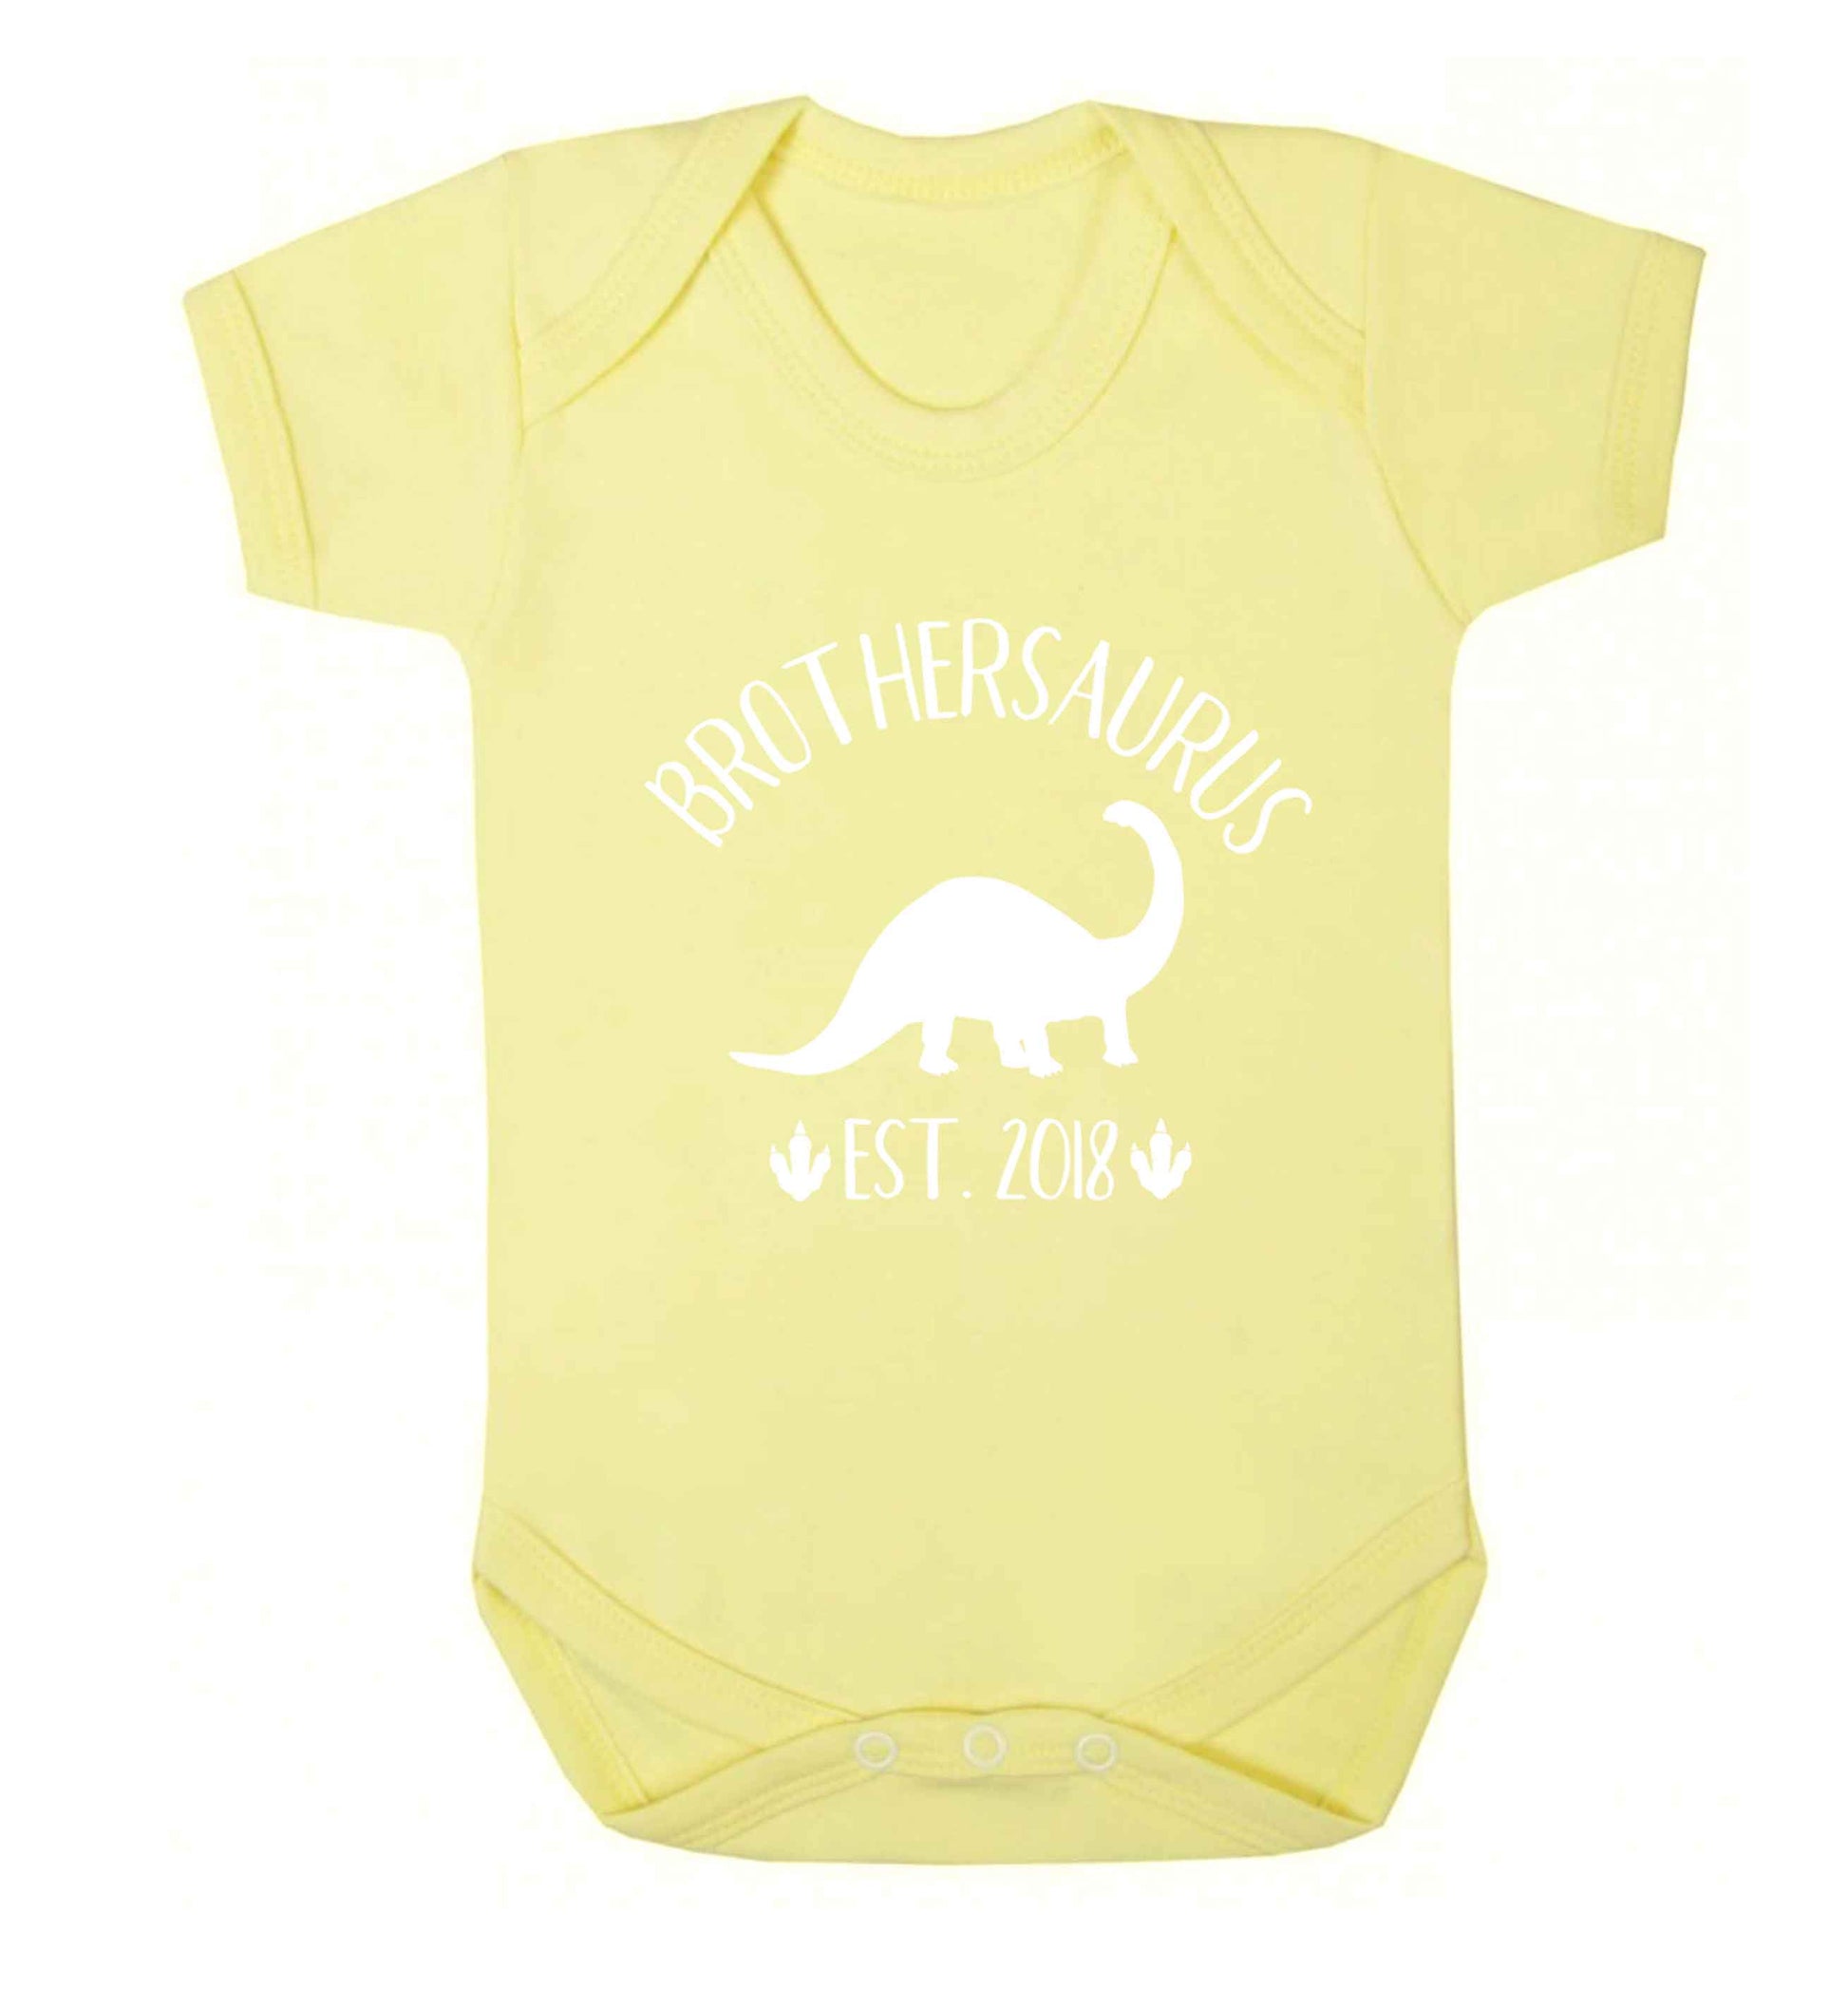 Personalised brothersaurus since (custom date) Baby Vest pale yellow 18-24 months